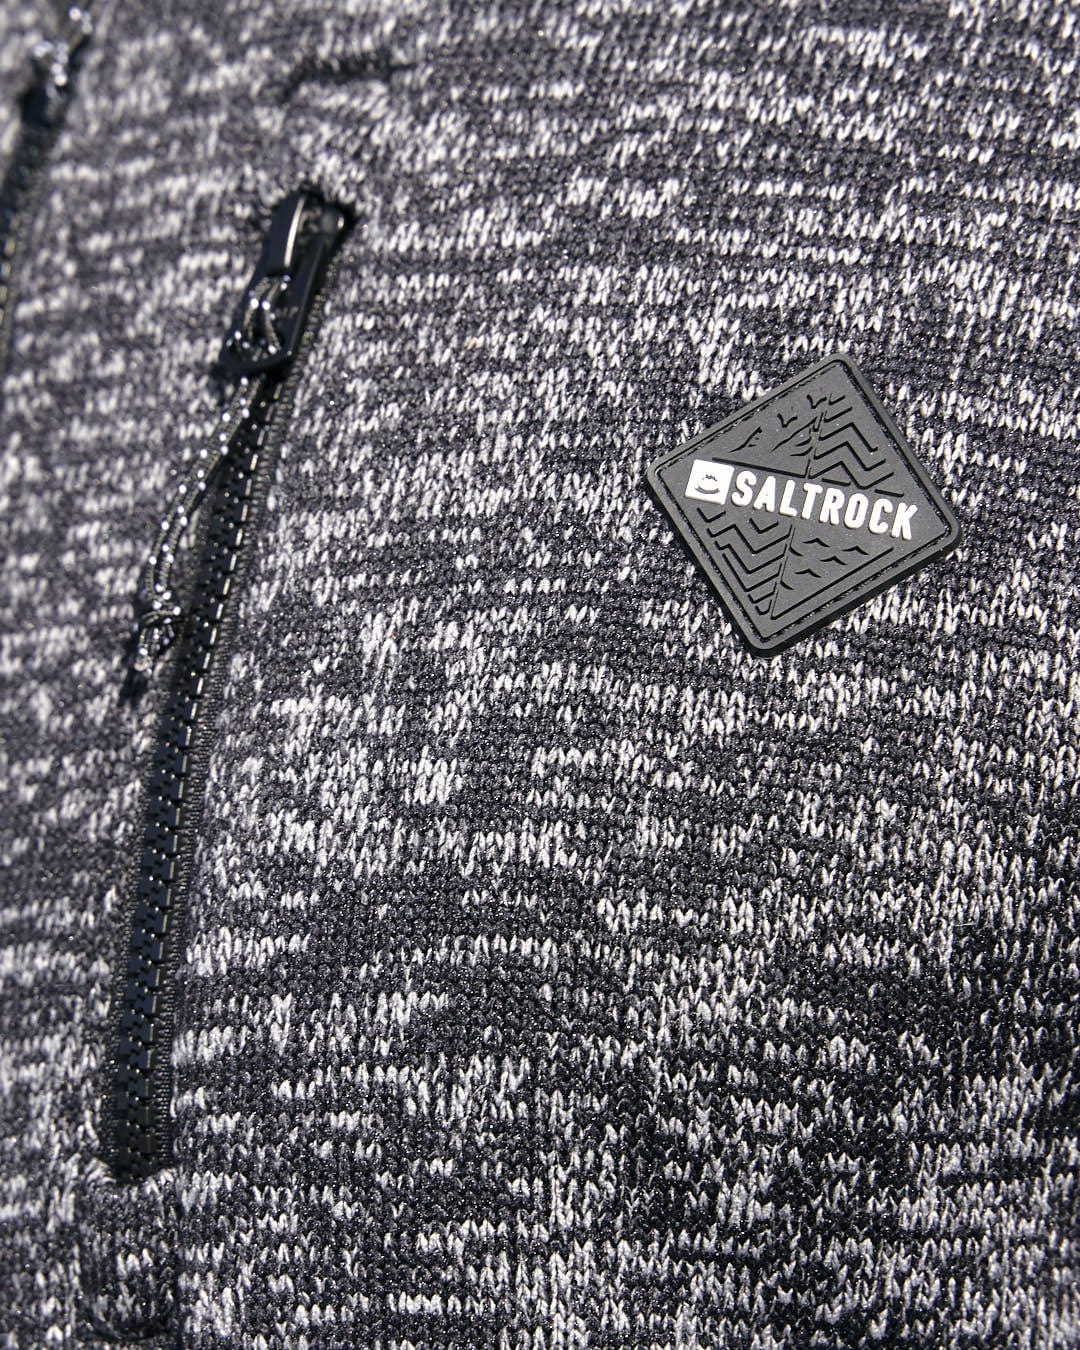 A close up of a Saltrock Oskar - Mens Bonded Zip Hoodie - Grey with a logo on it.